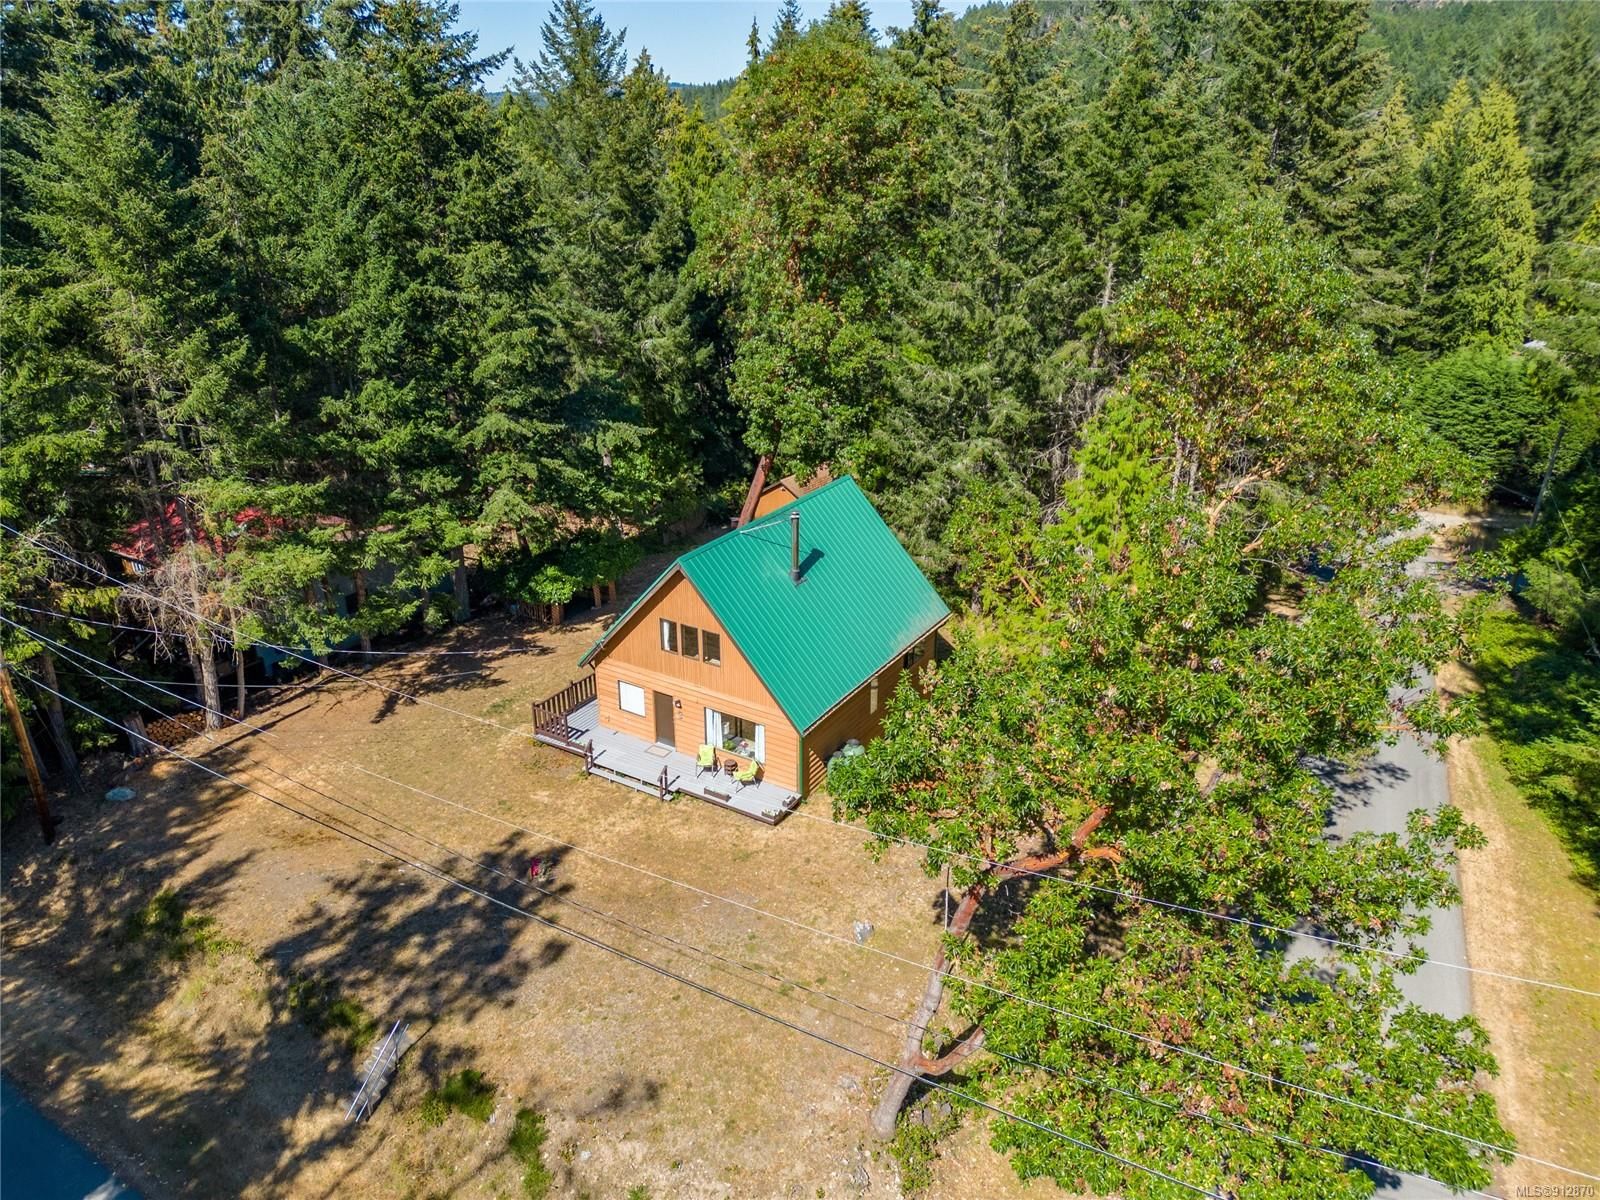 I have sold a property at 2602 Dory Way in Pender Island
